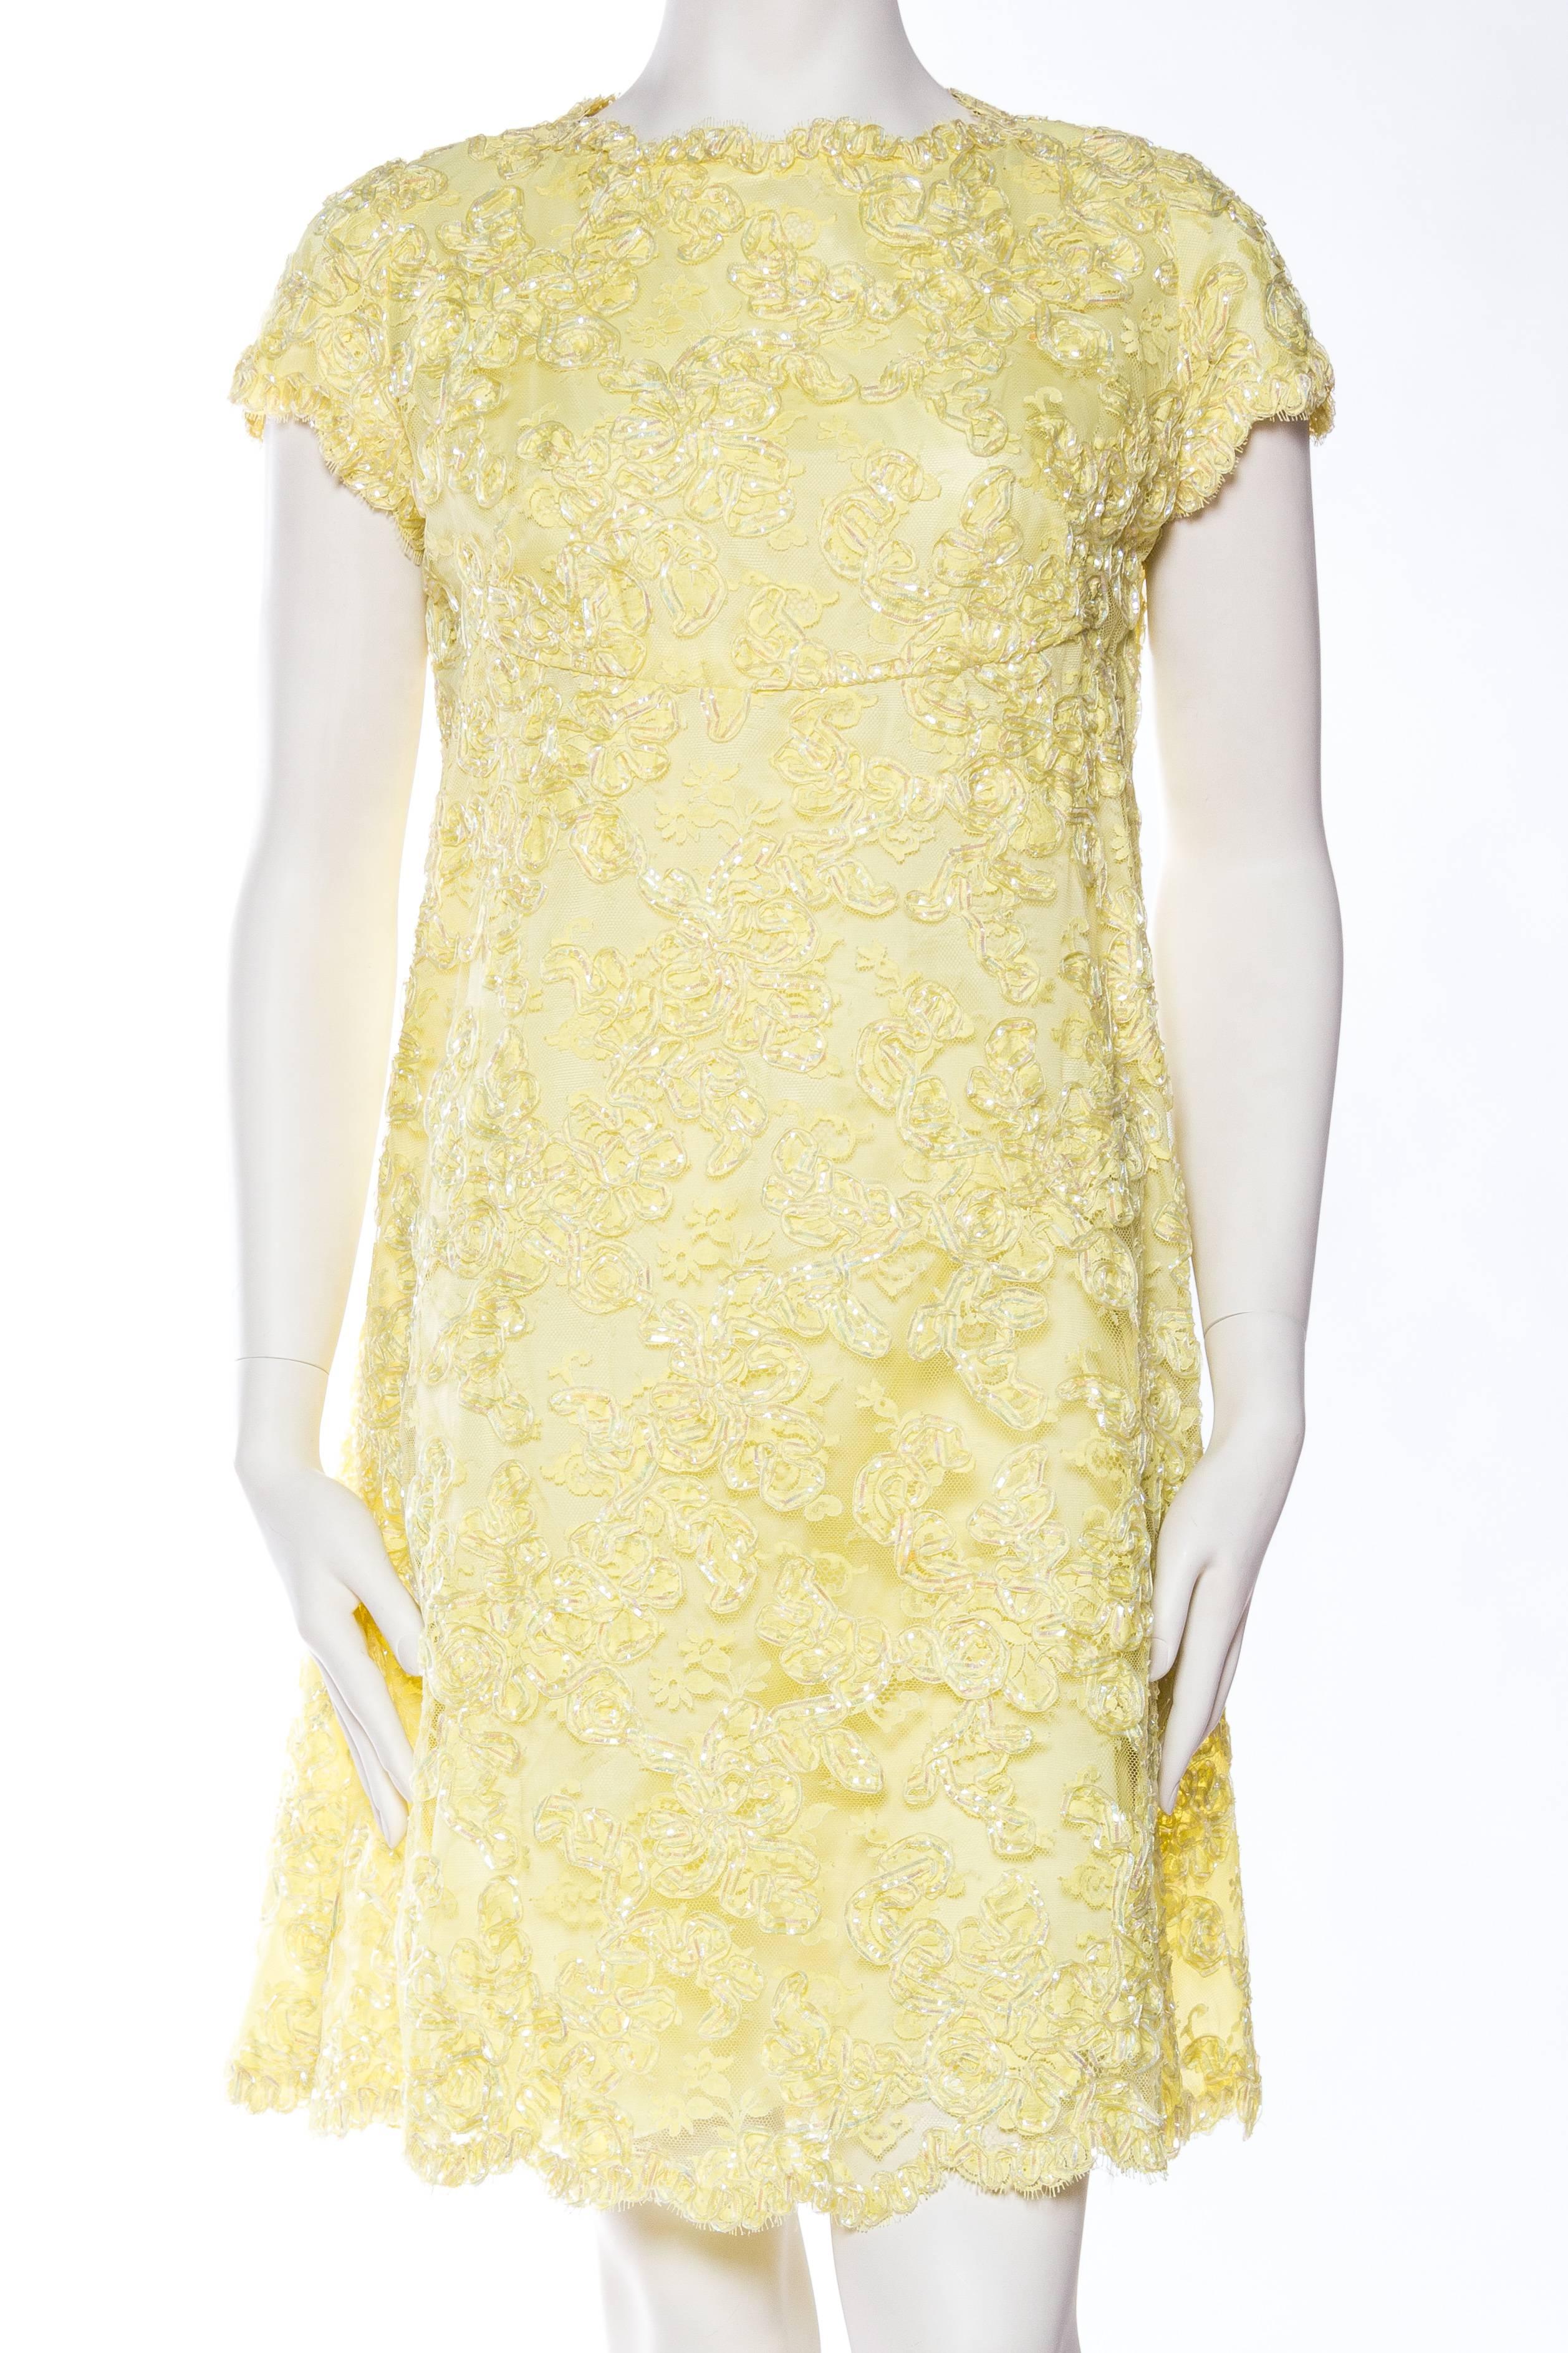 Fun 1960s Lurex Embroidered Lace Dress in the style of Jackie O. 